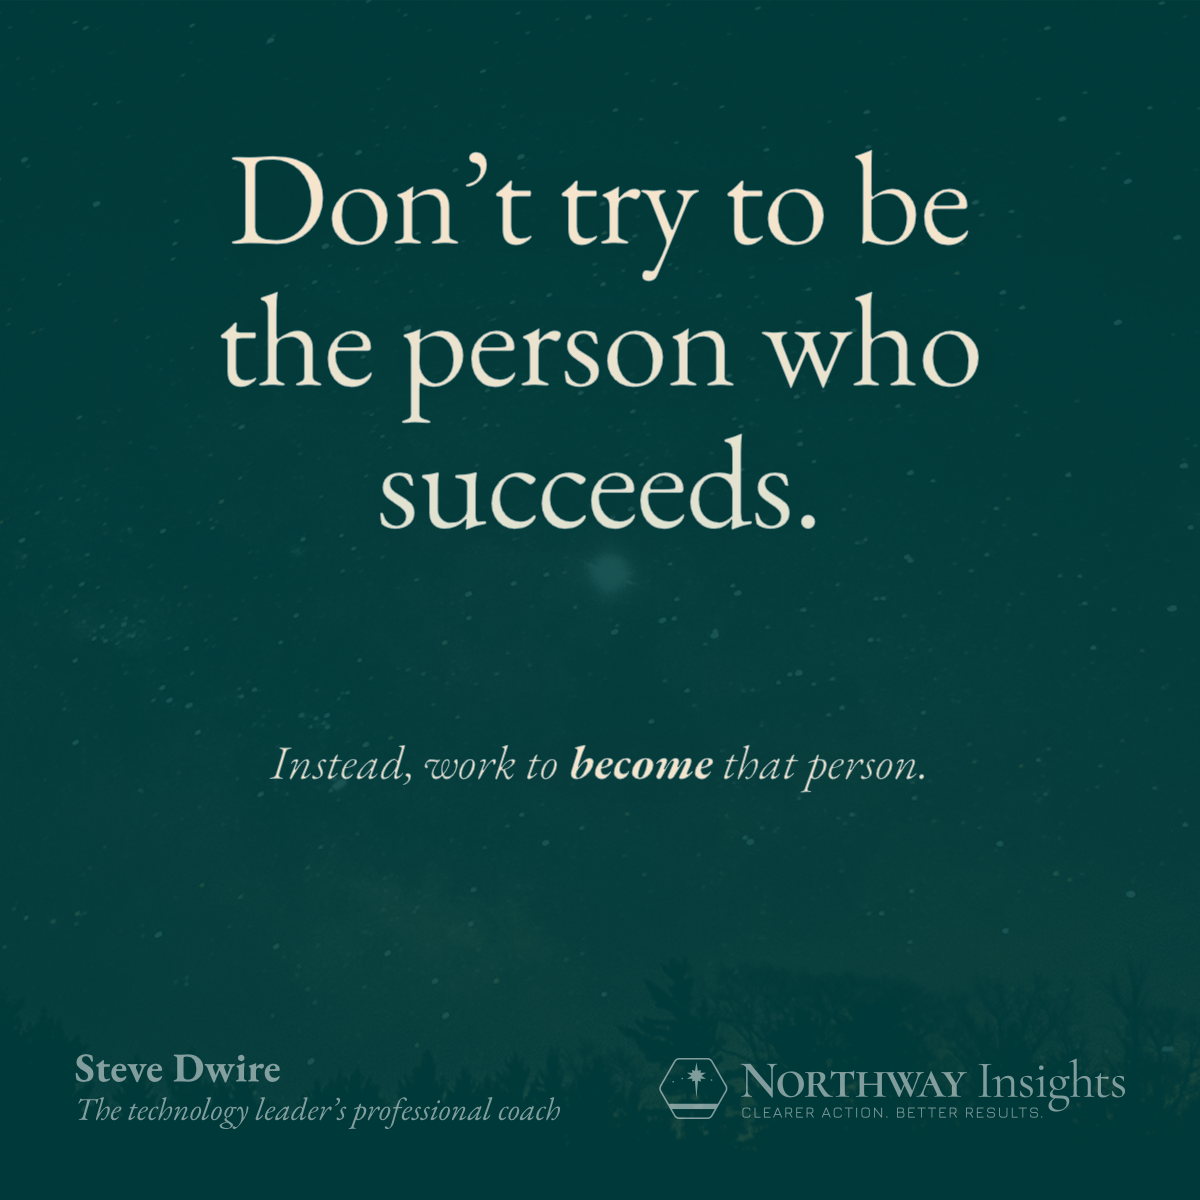 Don’t try to be the person who succeeds